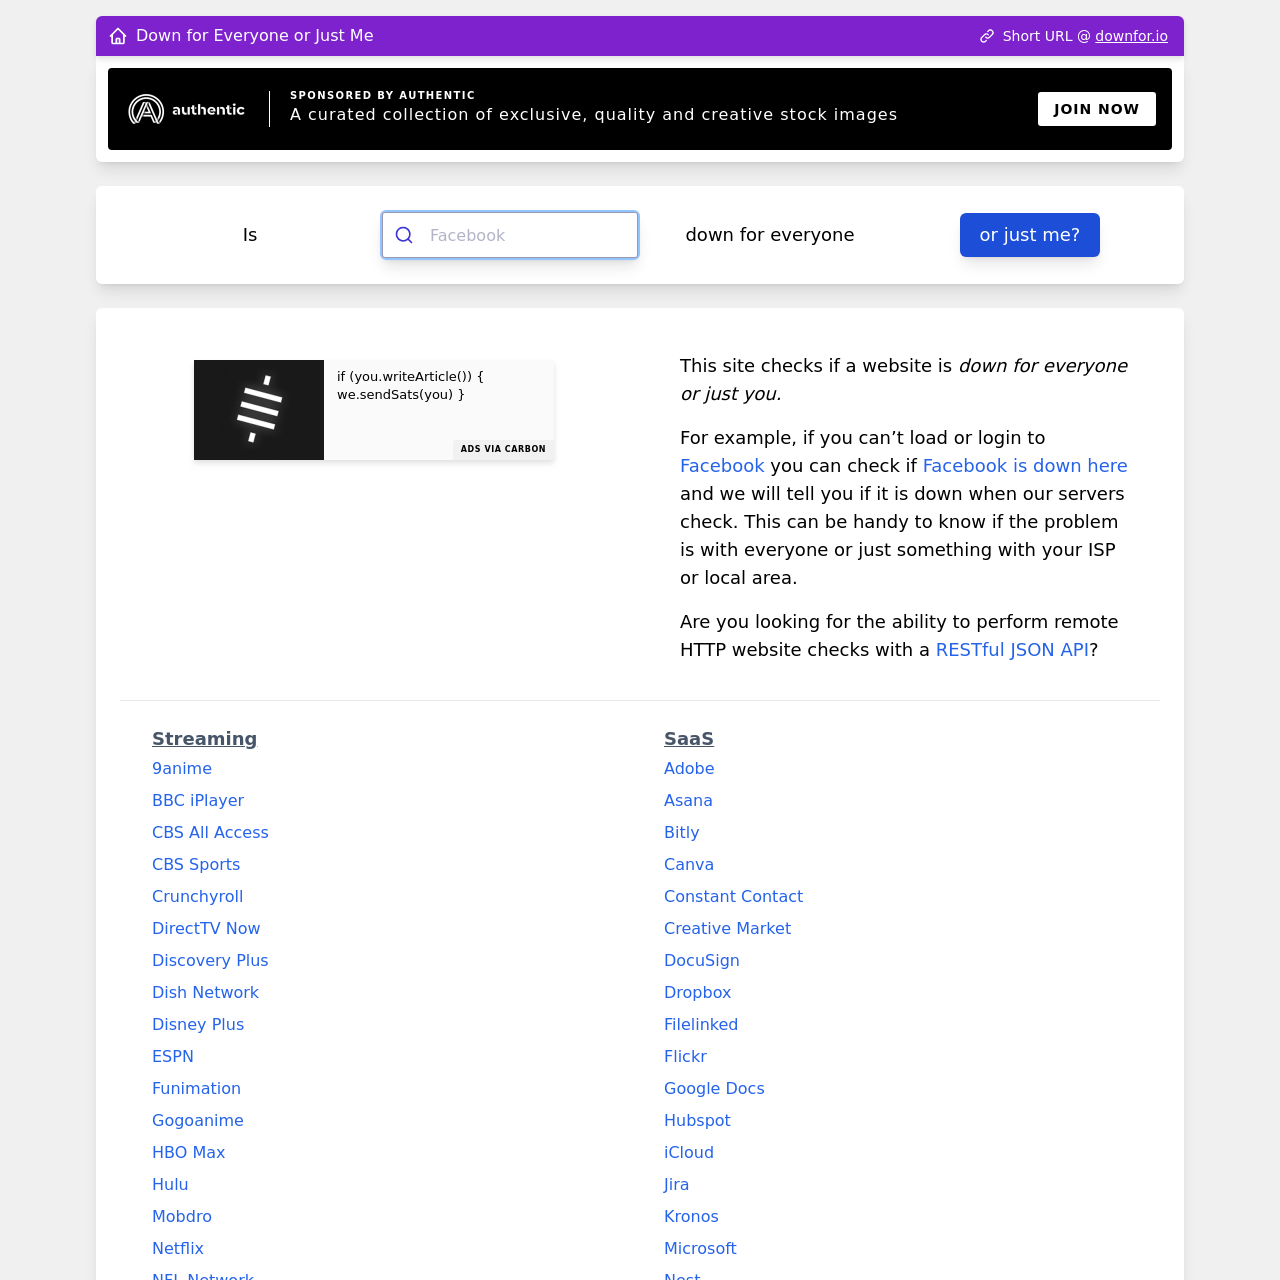 Screenshot of Down for Everyone or Just Me website